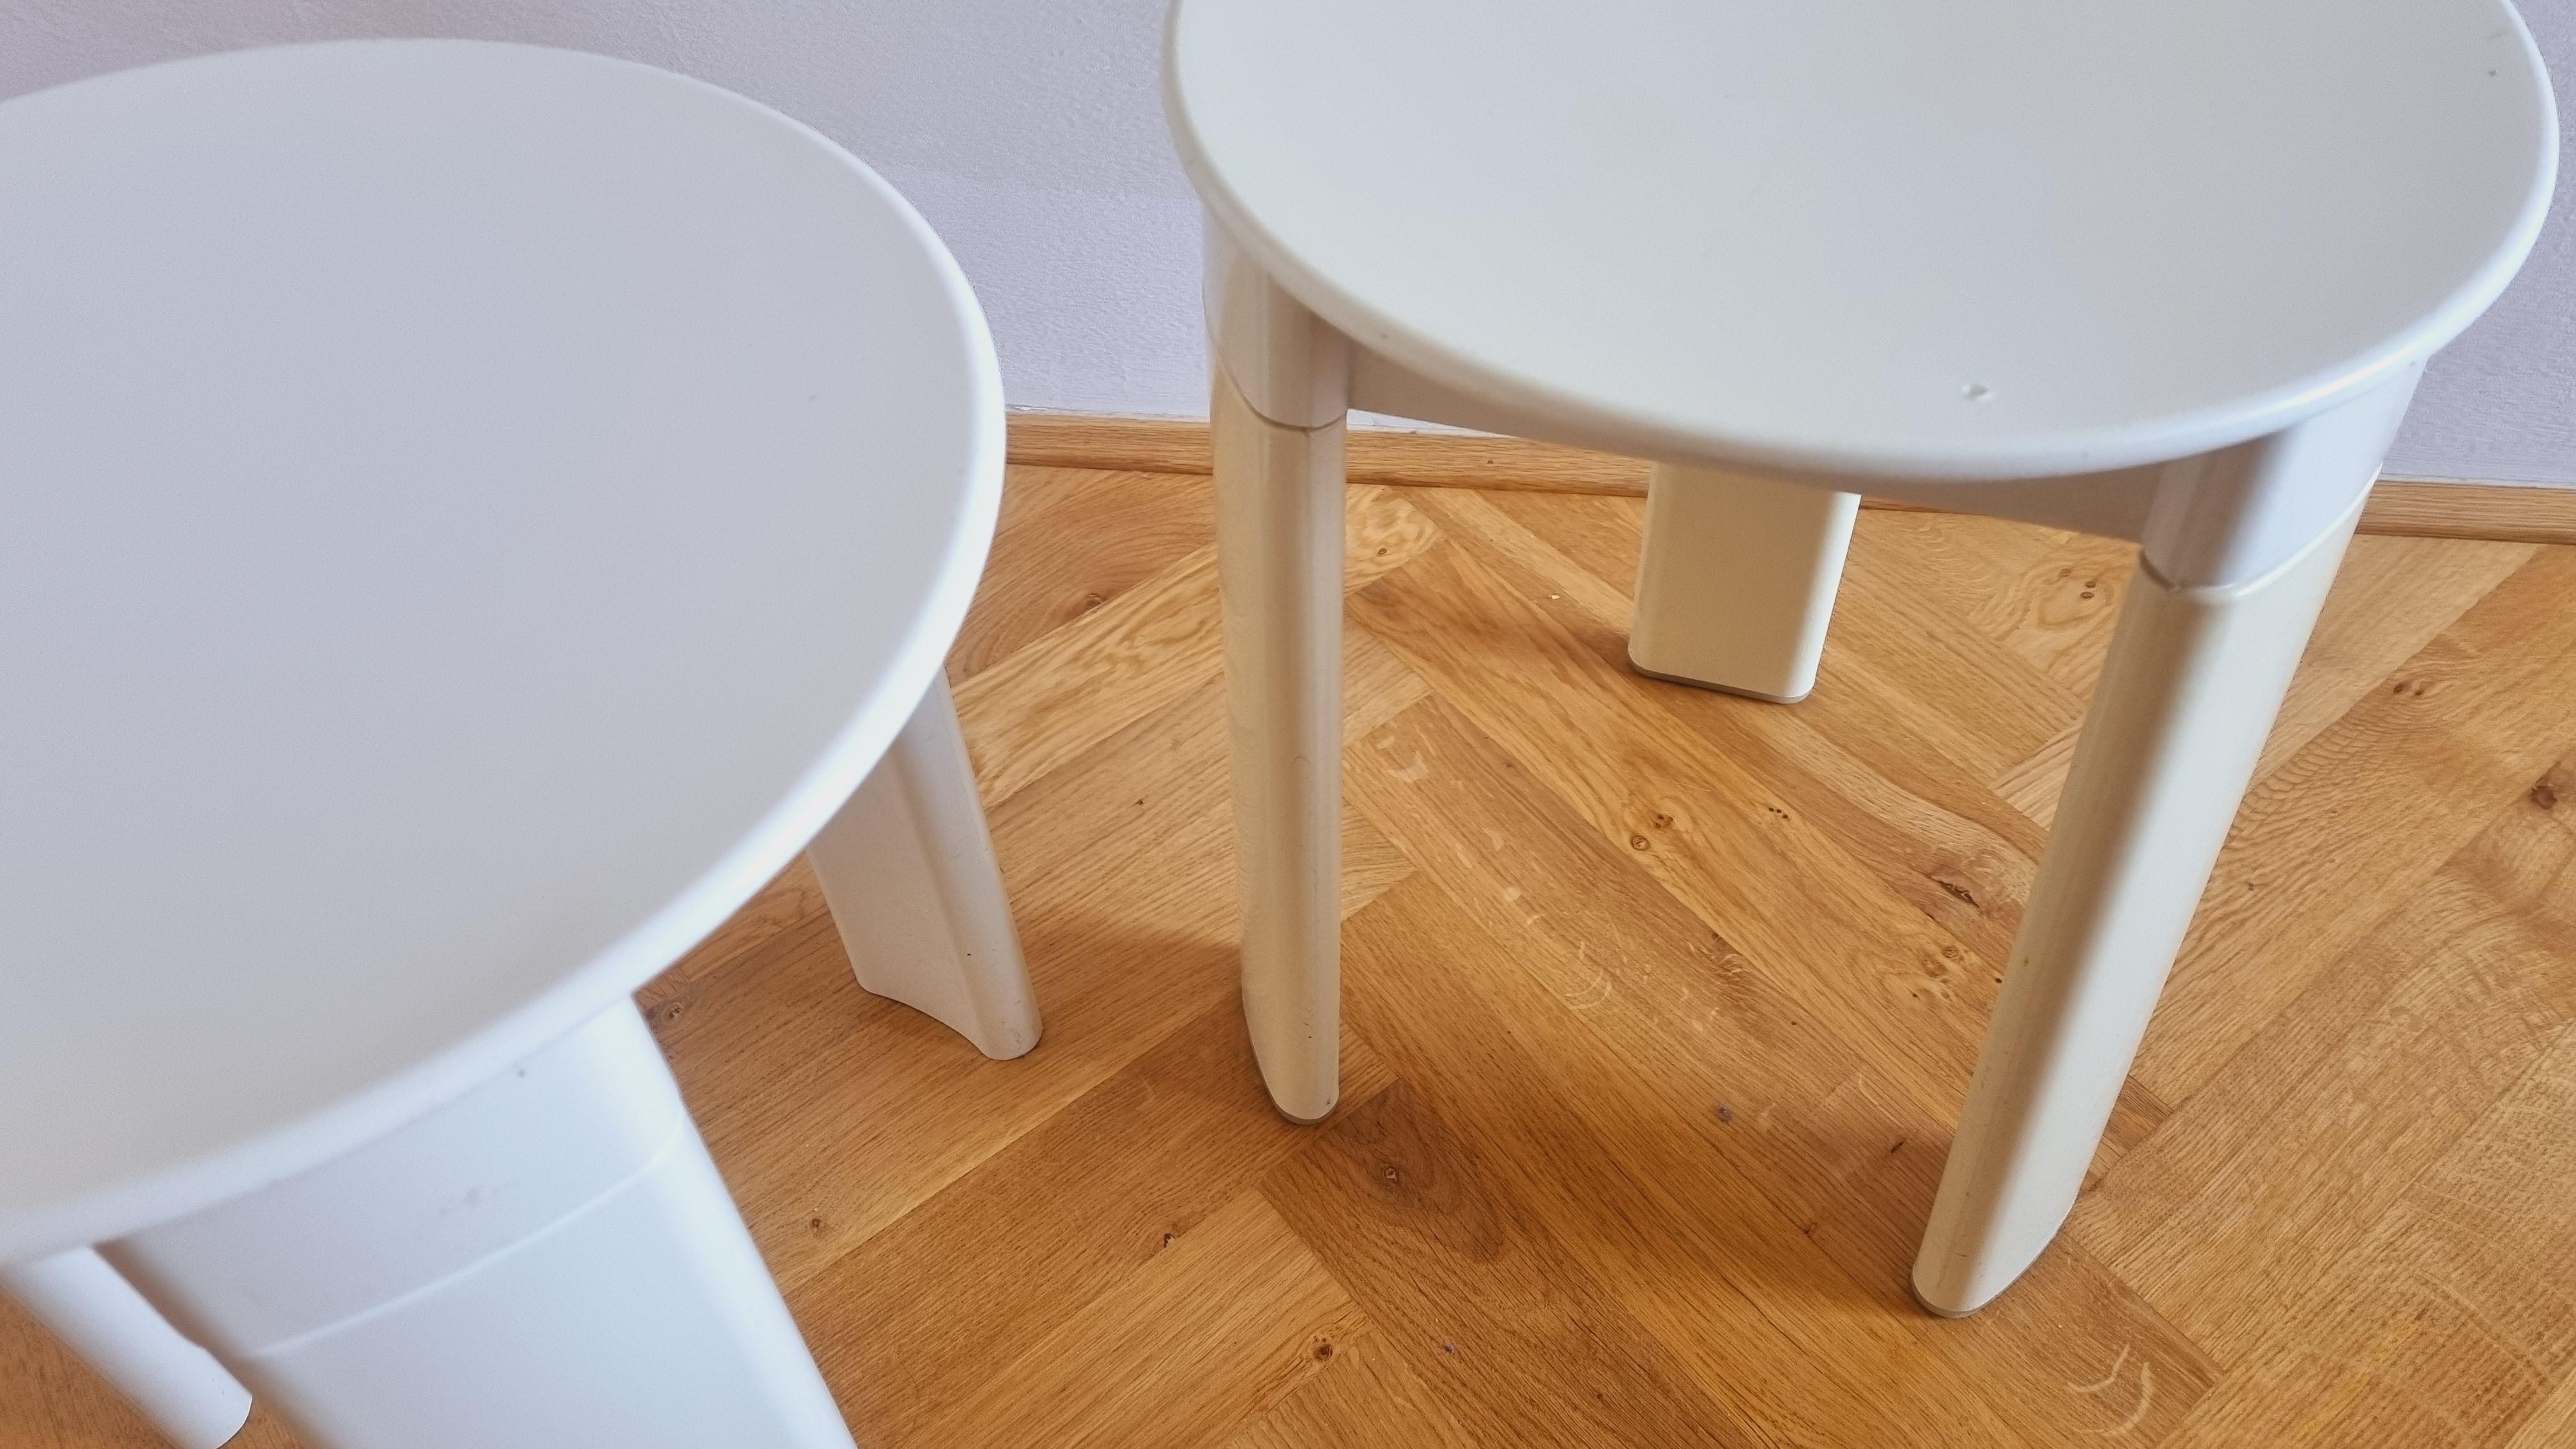 Pair of Midcentury Stools or Side Tables Trio, Olaf Von Bohr, Gedy, Italy, 1970s For Sale 6